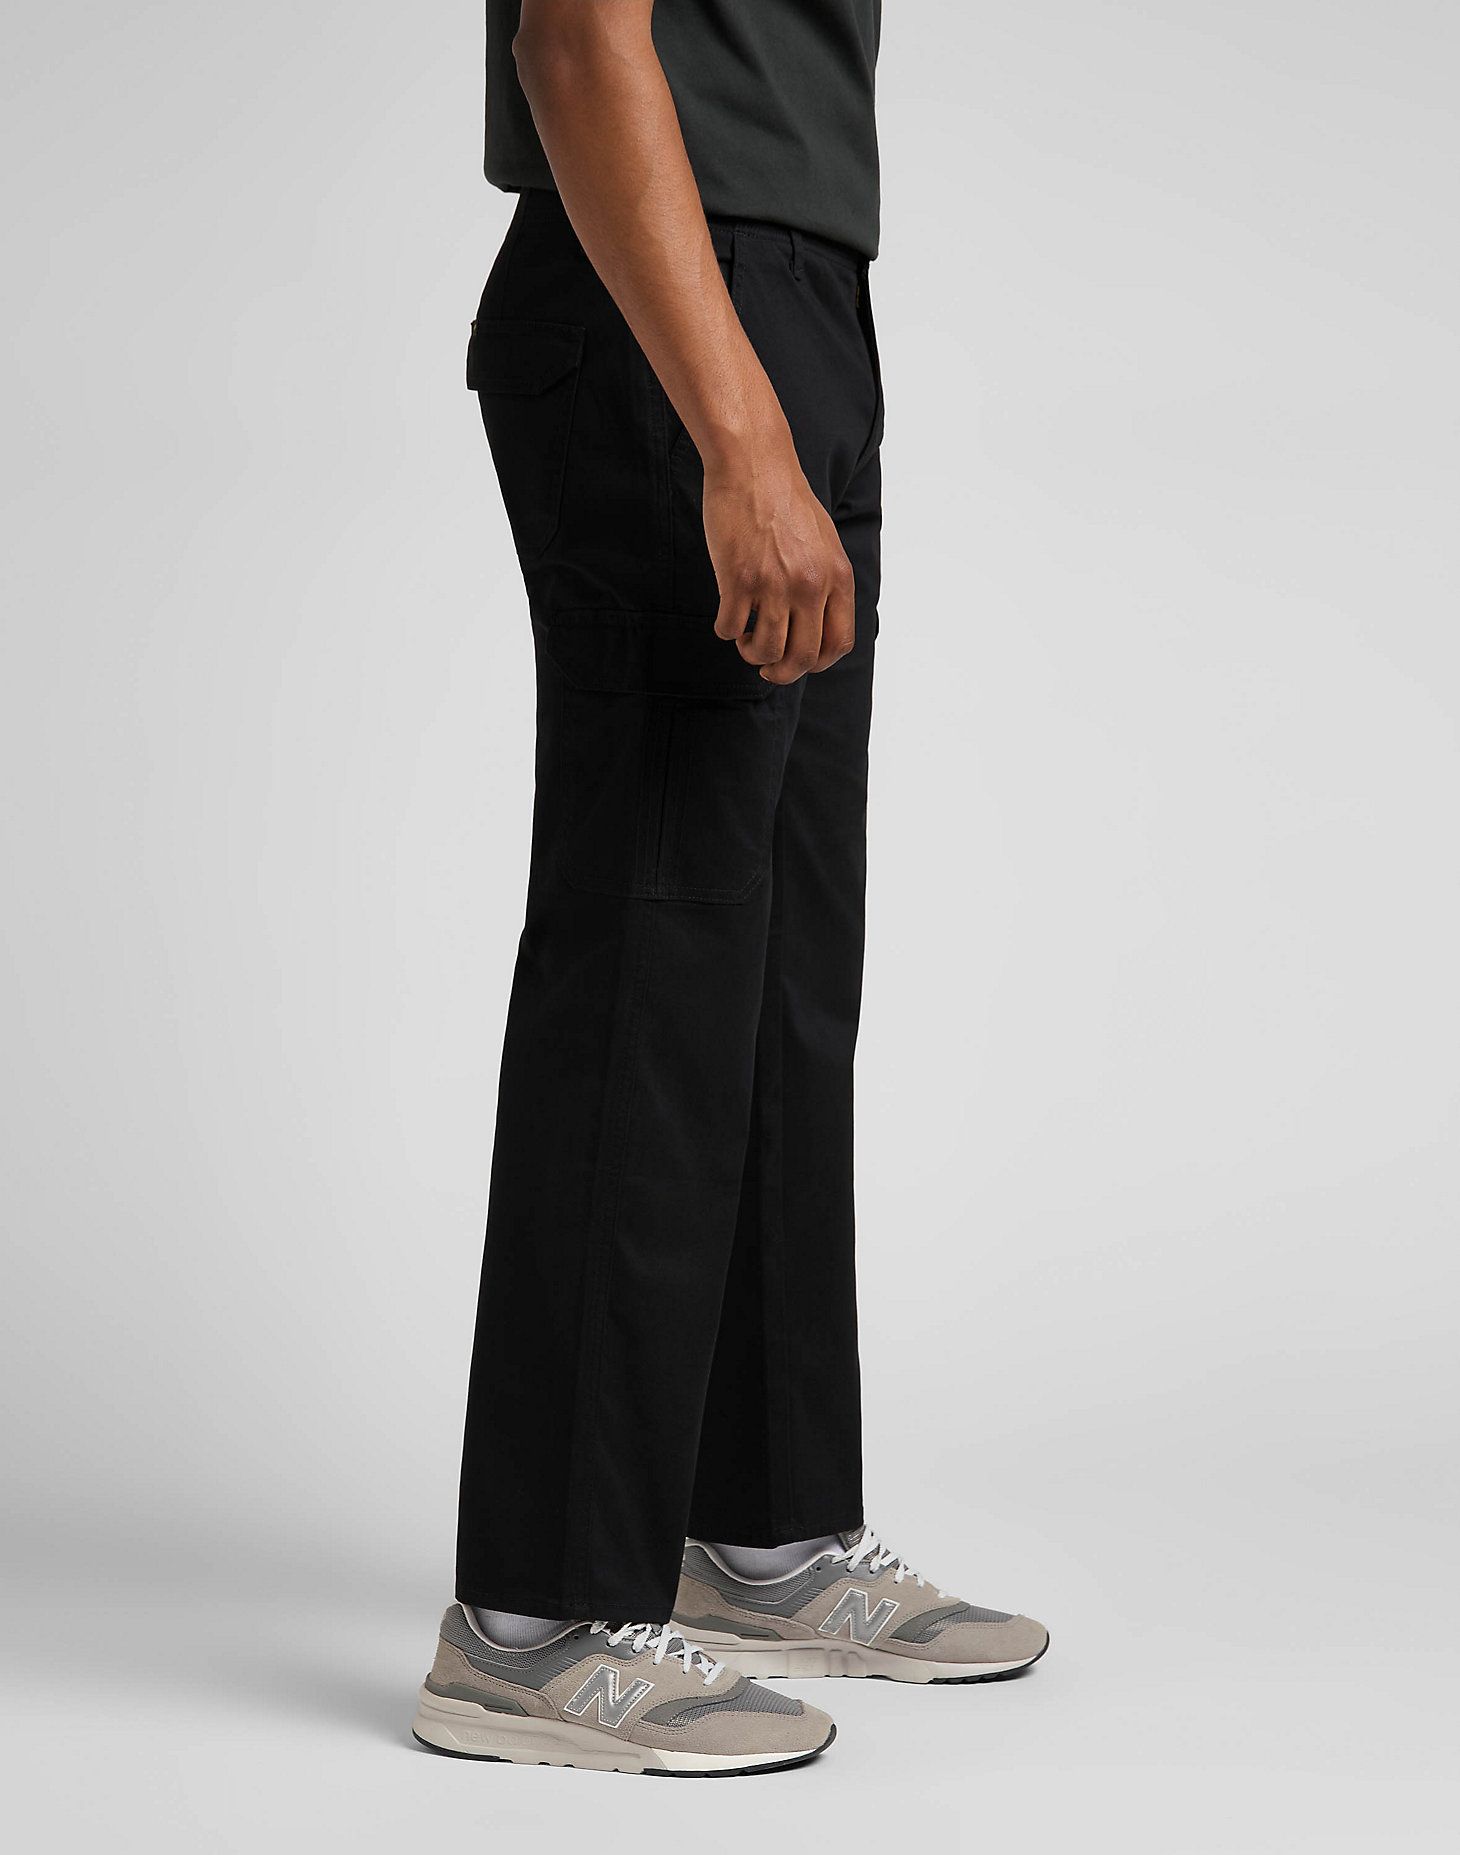 Cargo Pant Xc in Union All Black alternative view 3